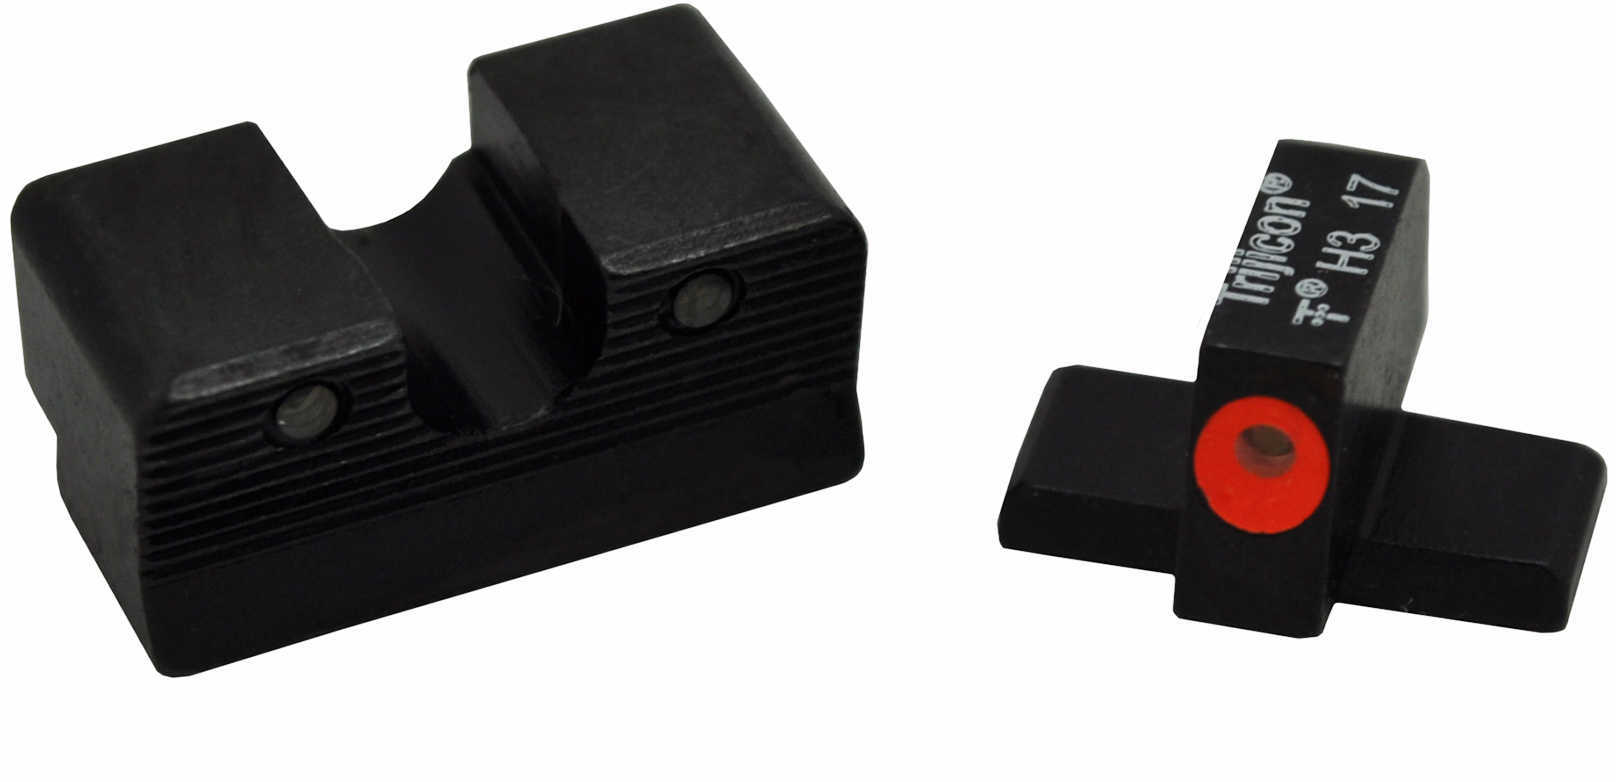 Trijicon HD XR Night Sight Set Orange Front Outline Comparable to #8 Front/#8 Rear Sauer Pistols